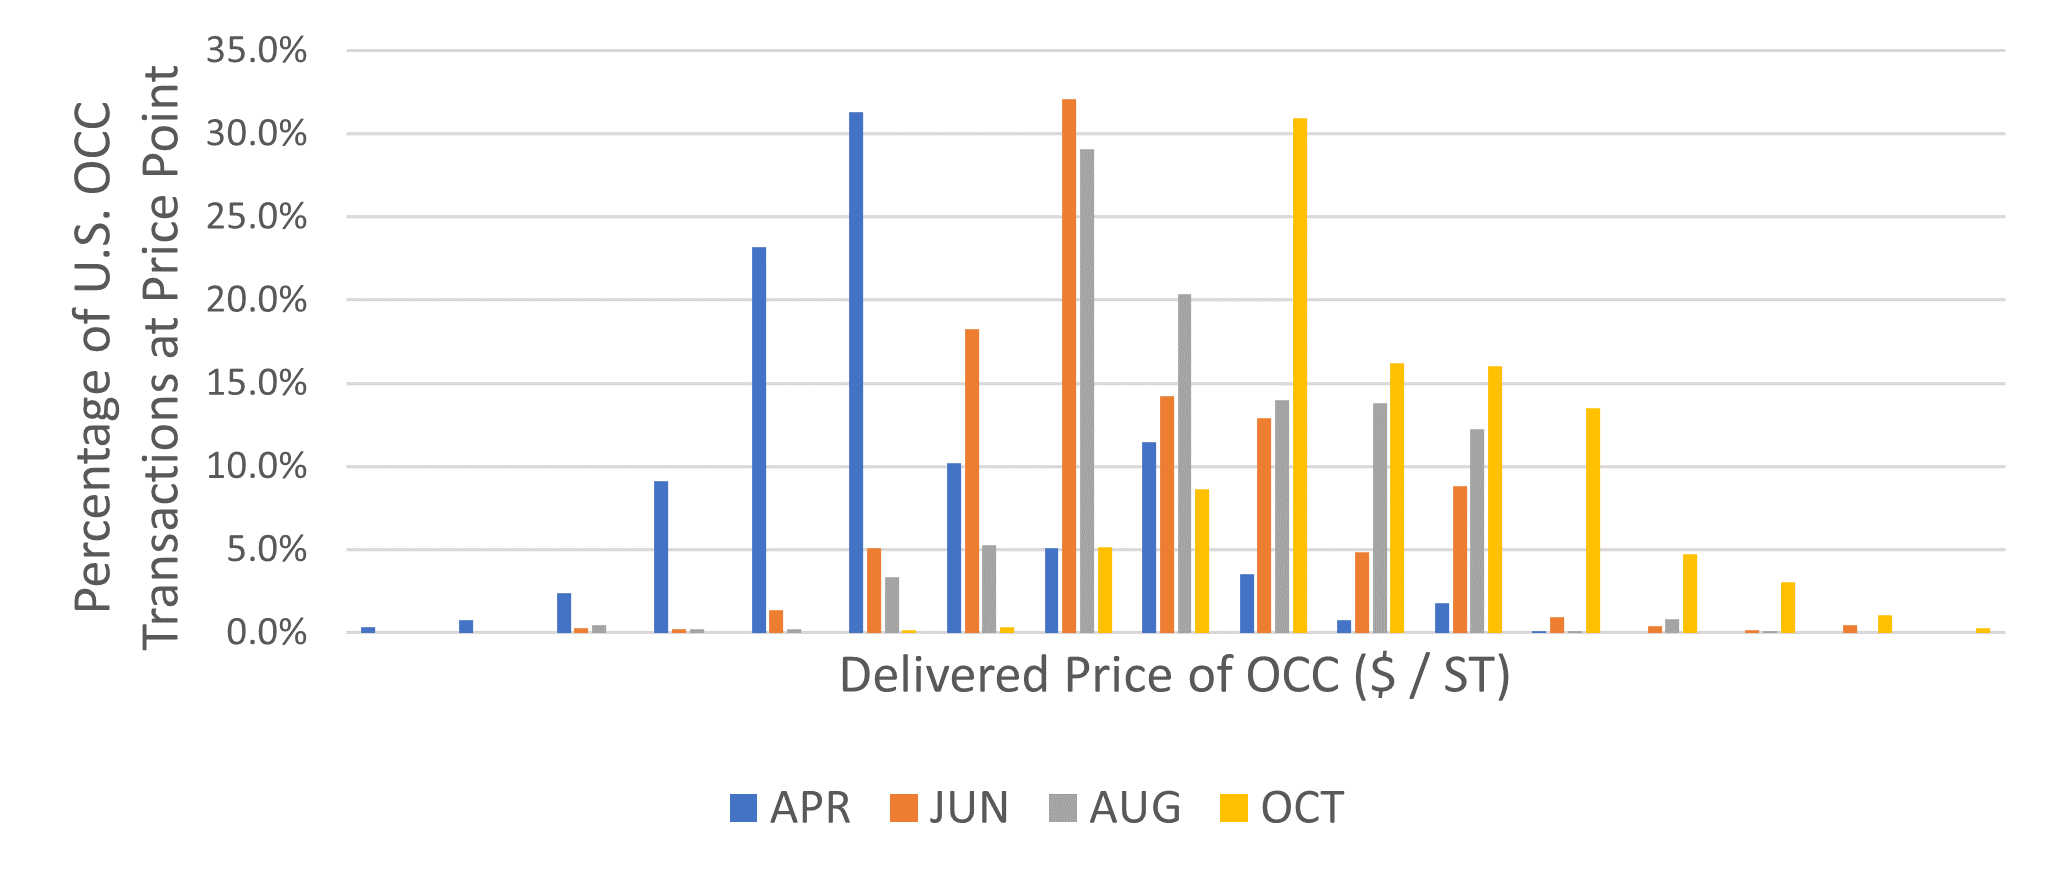 OCC Prices Have Increased Rapidly – How Does it Impact Linerboard Competitiveness?